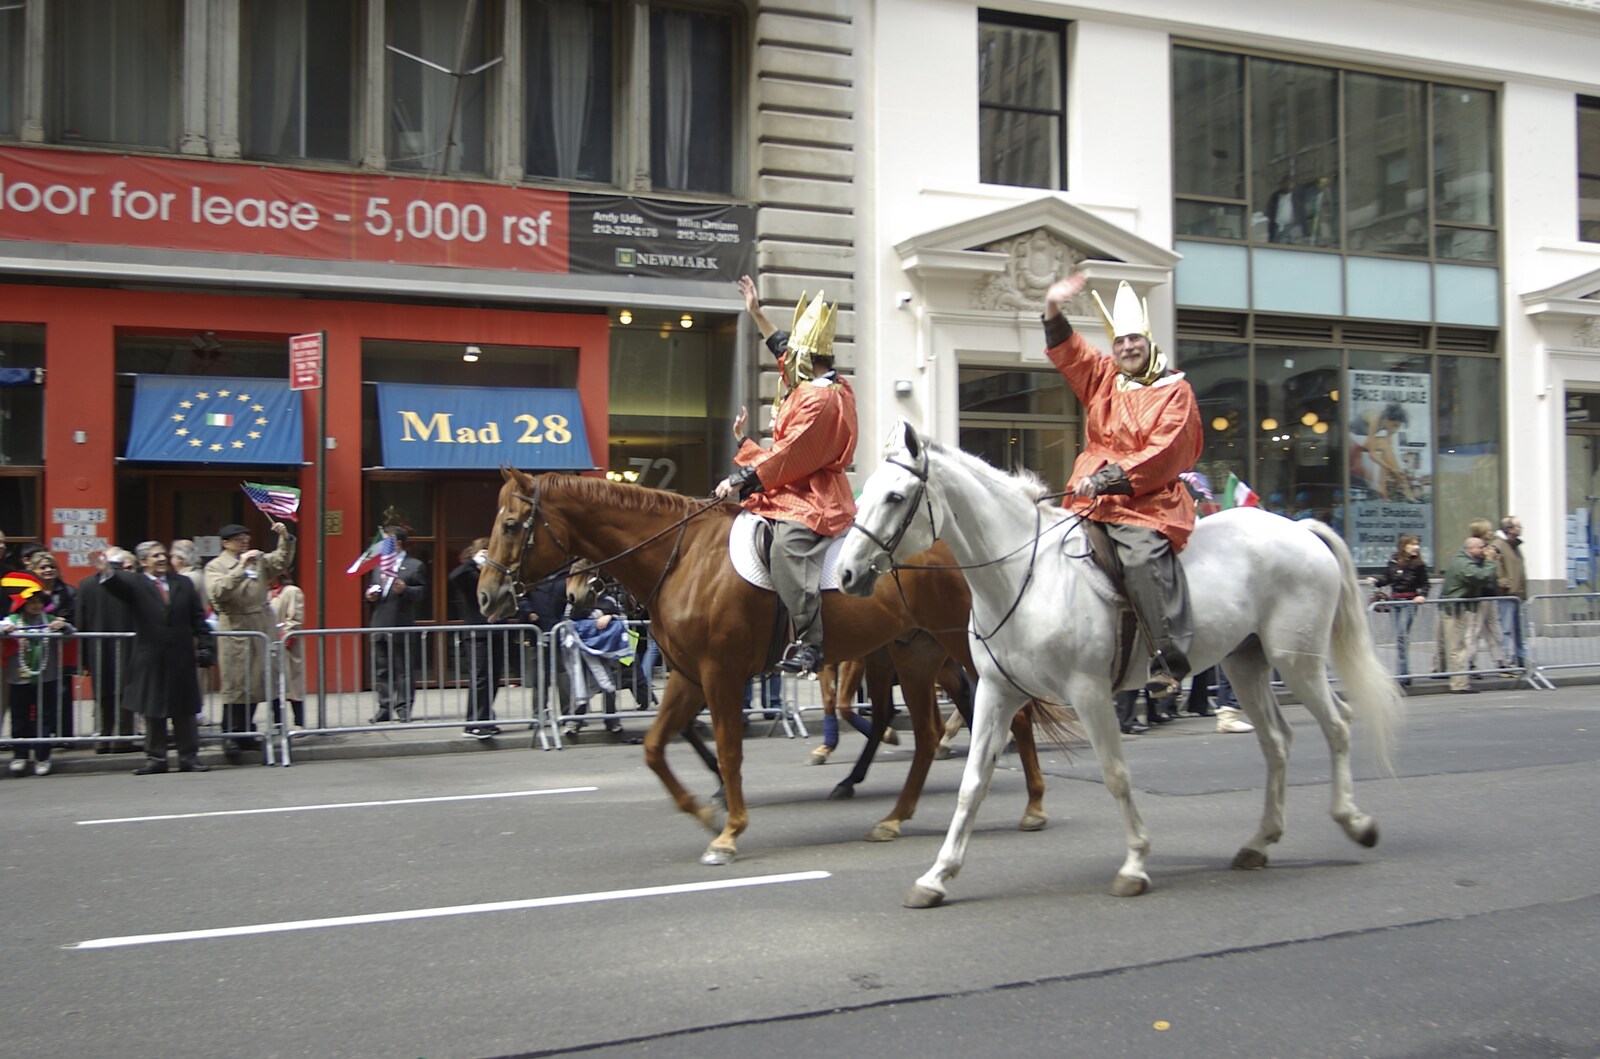 Persian Day Parade, Upper East Side and Midtown, New York, US - 25th March 2007: A couple of dudes on horseback